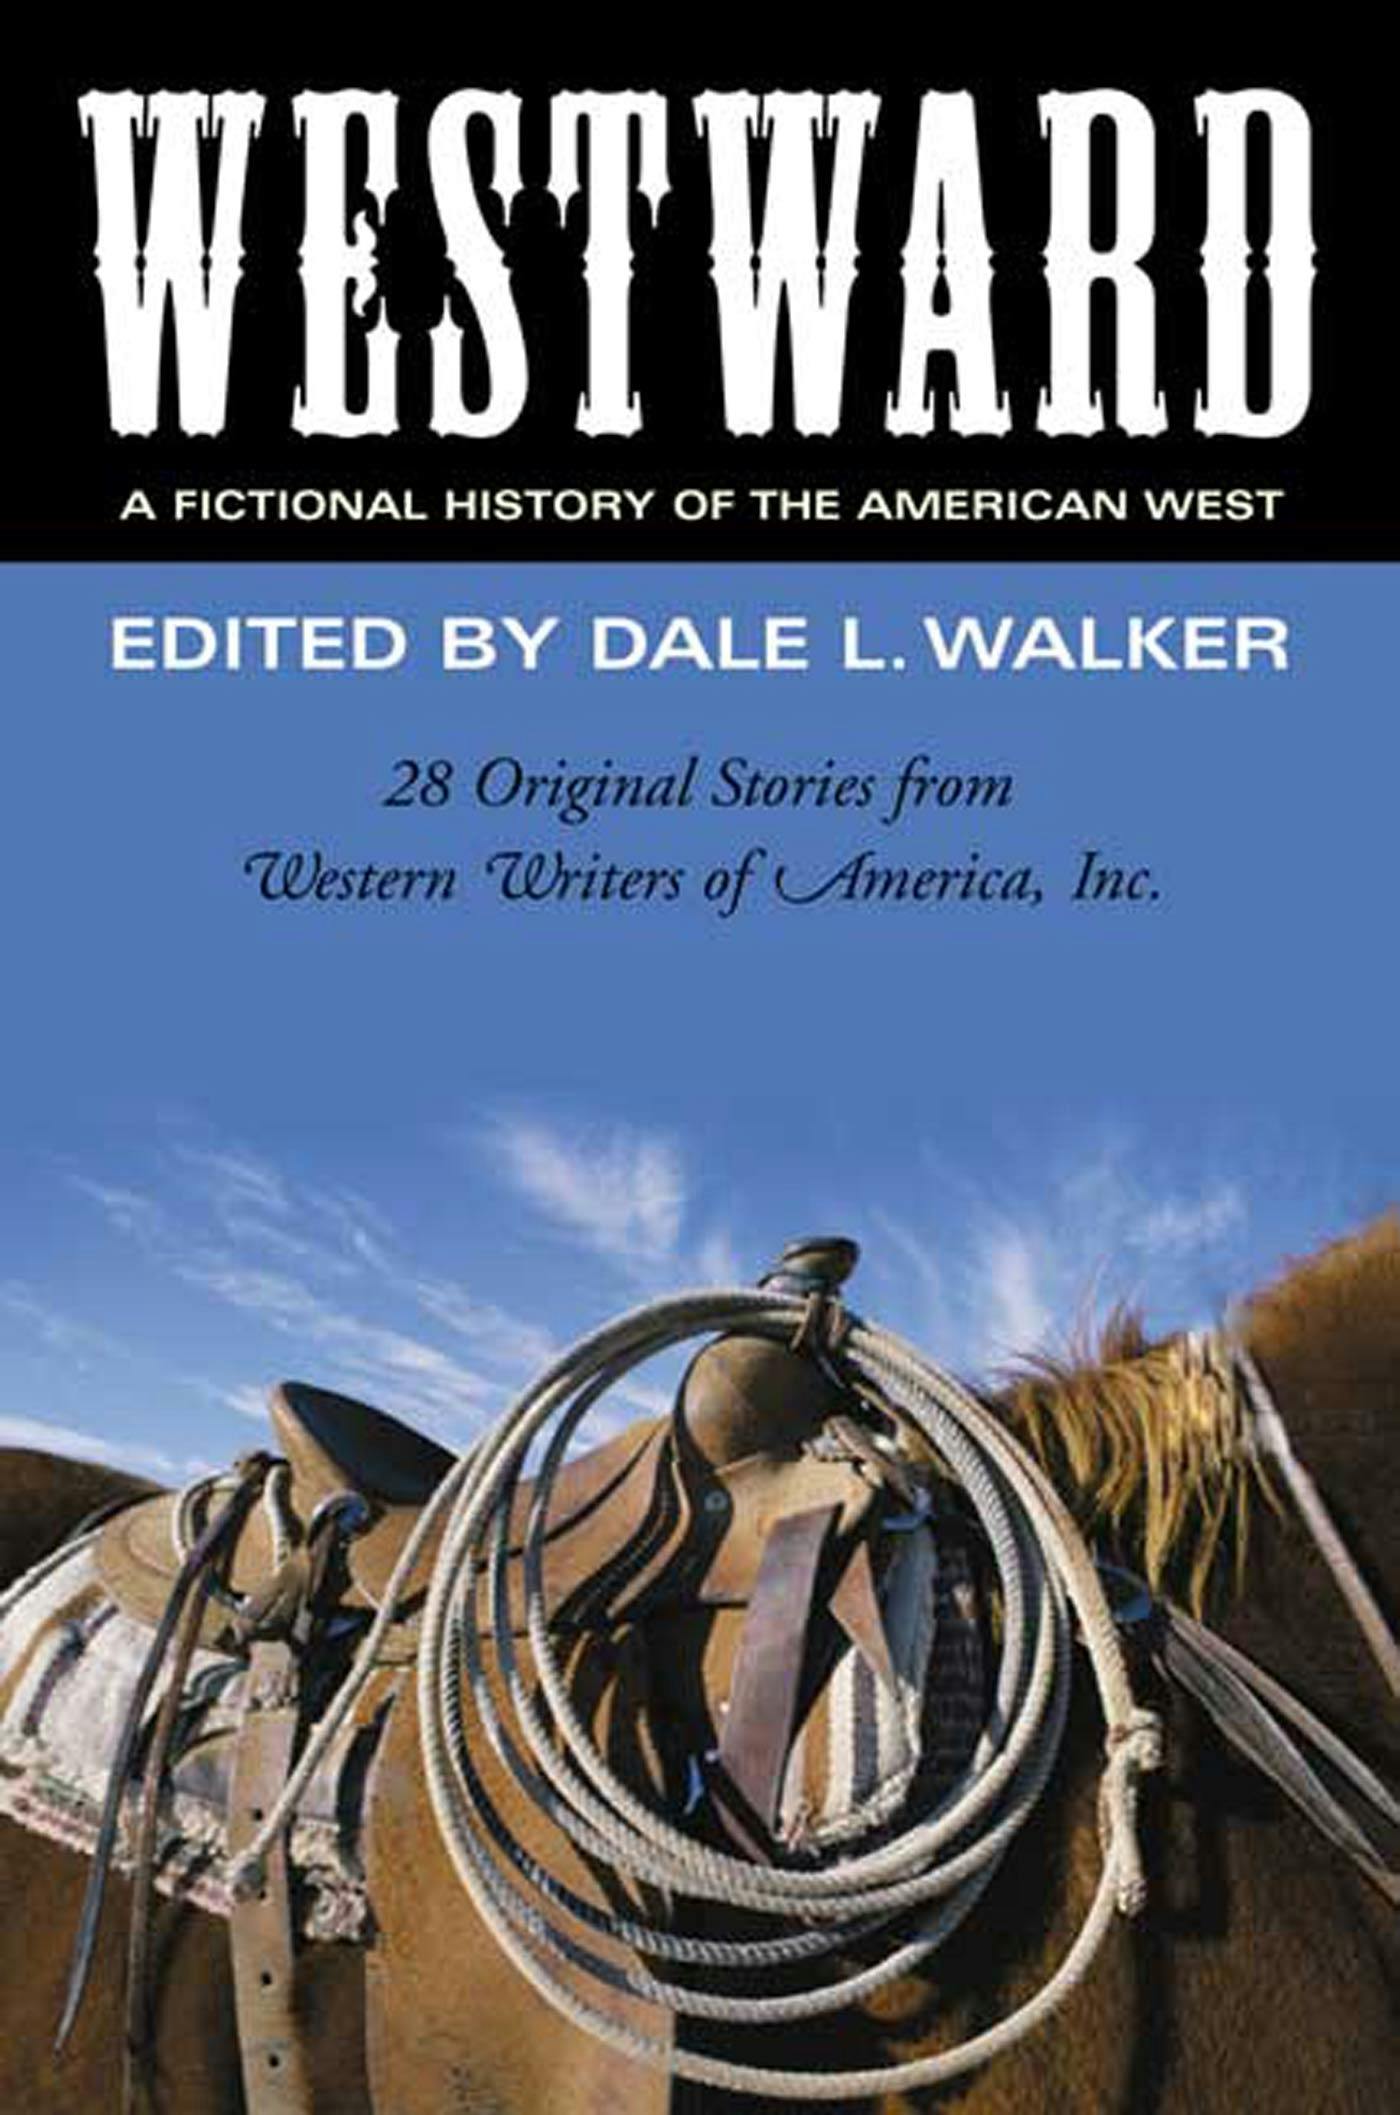 Cover for the book titled as: Westward: A Fictional History of the American West